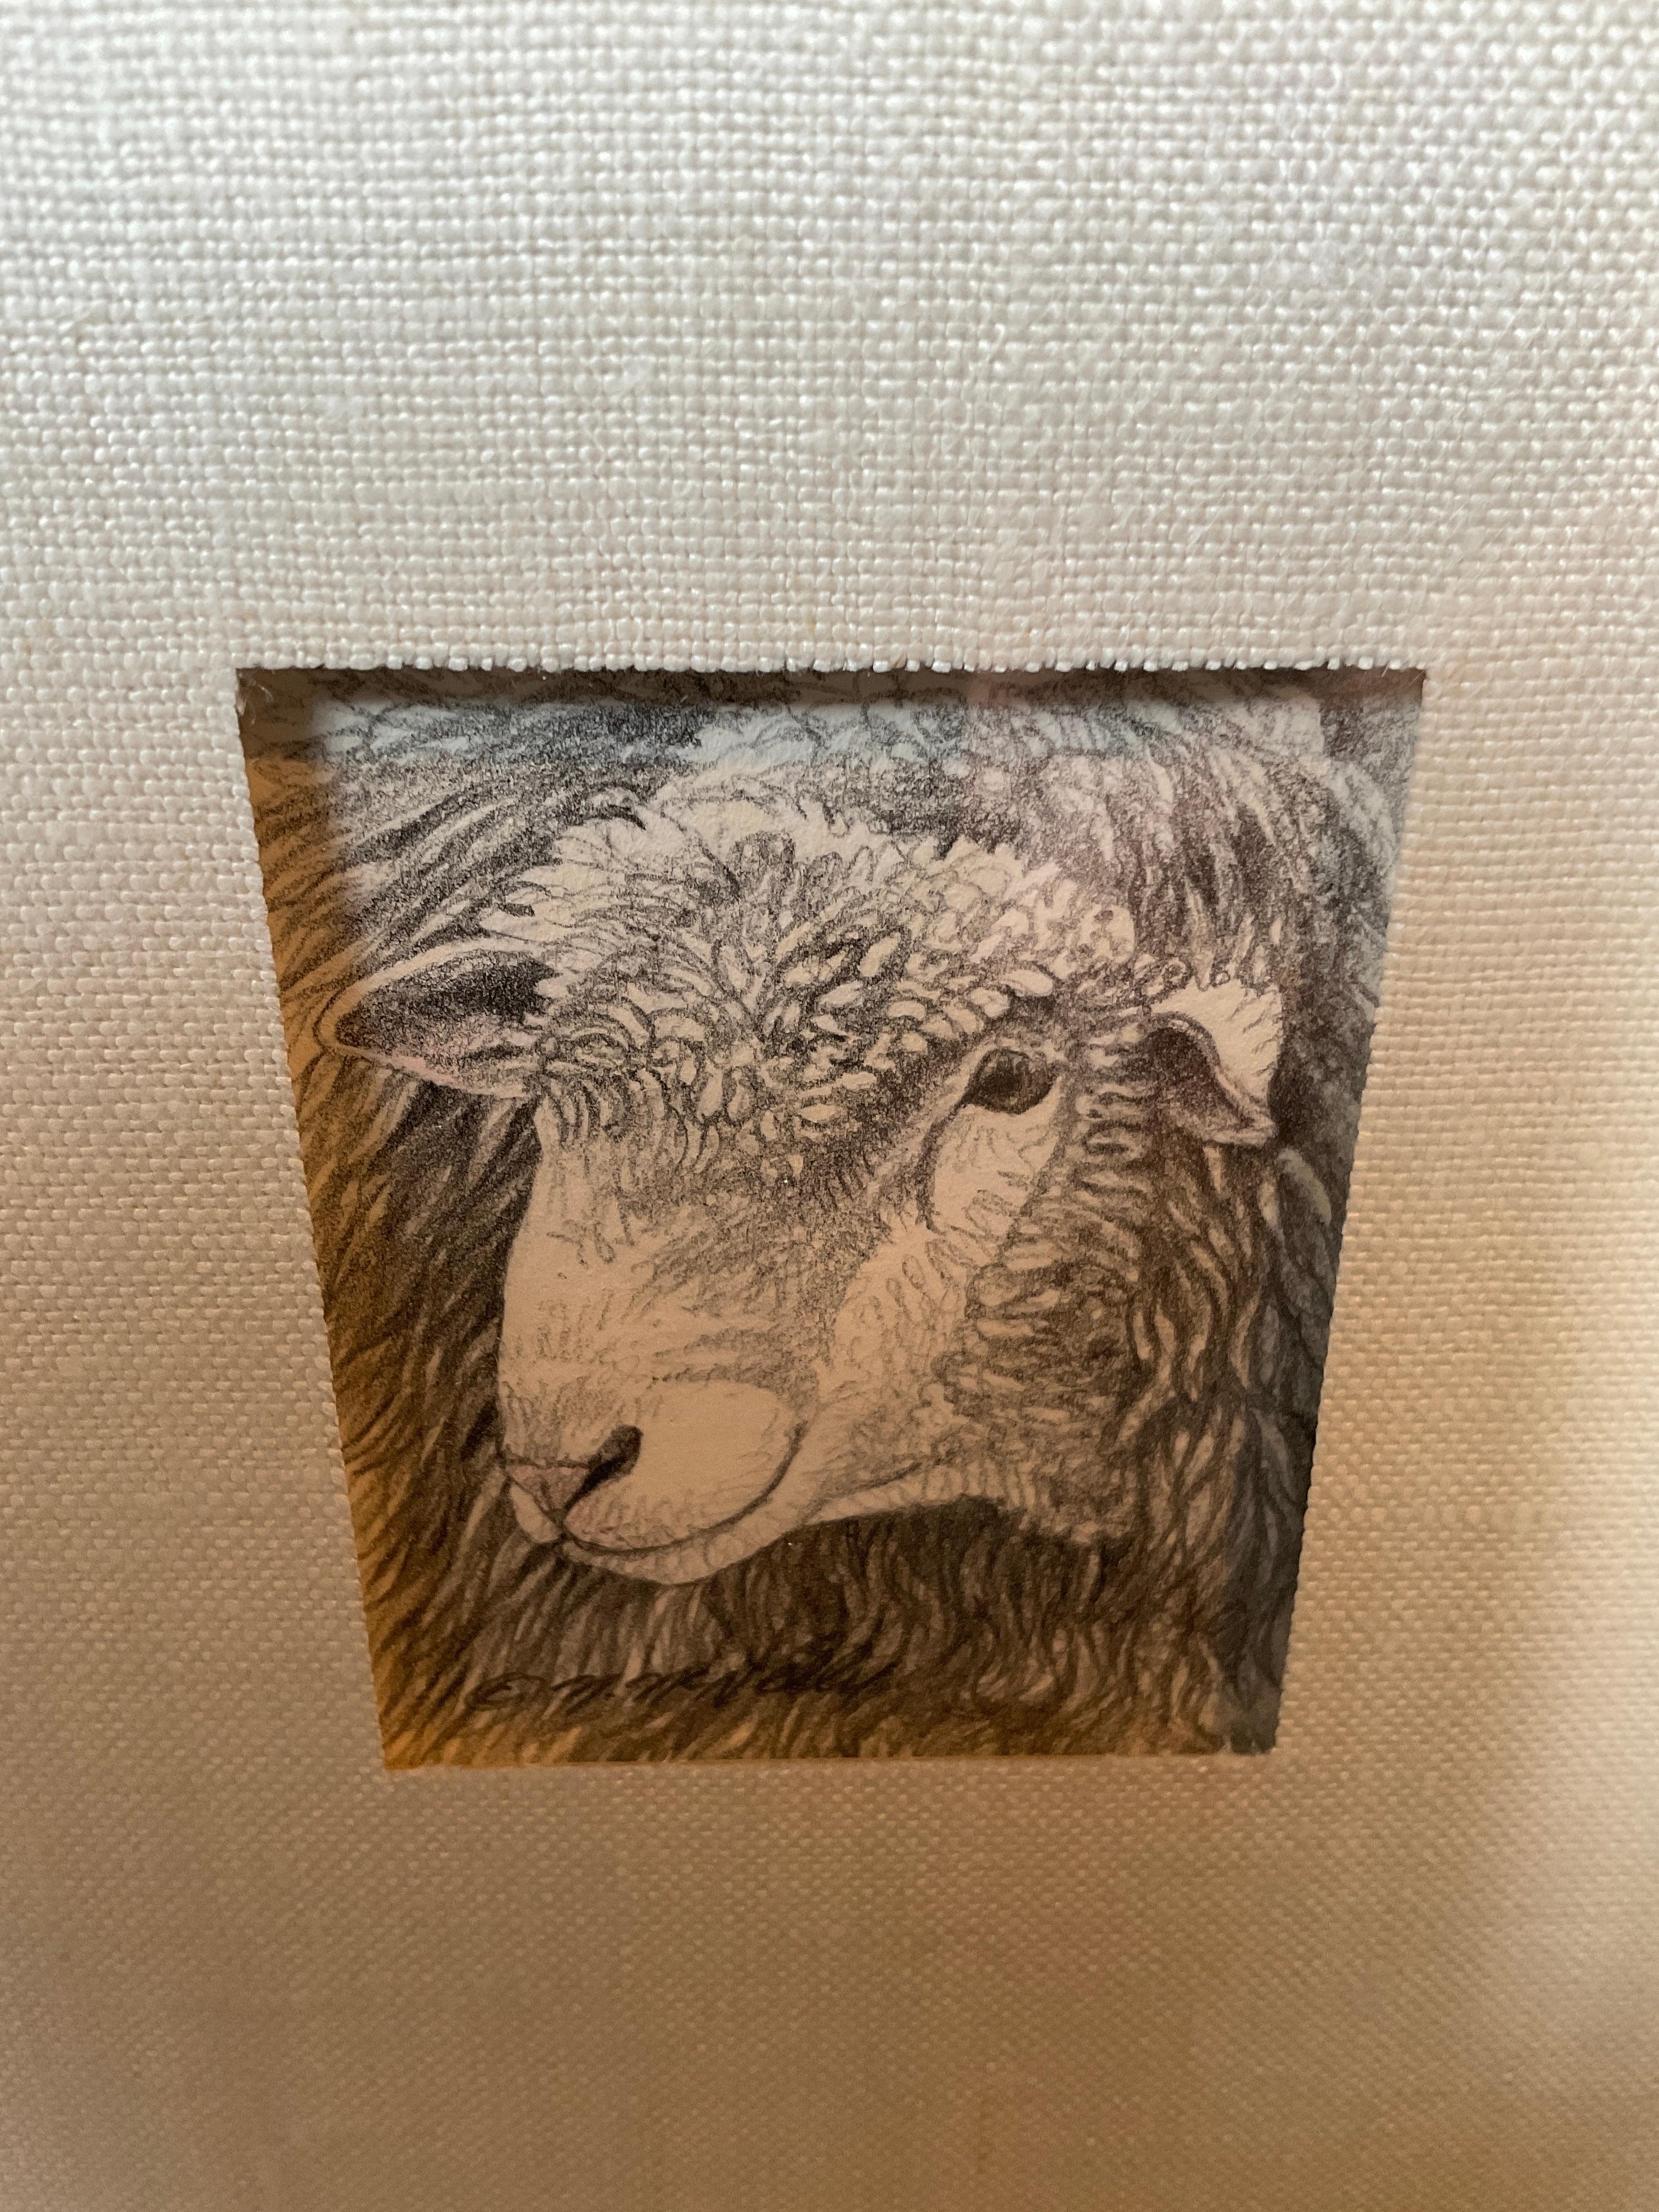 Pencil drawing of a sheep signed McNelly.